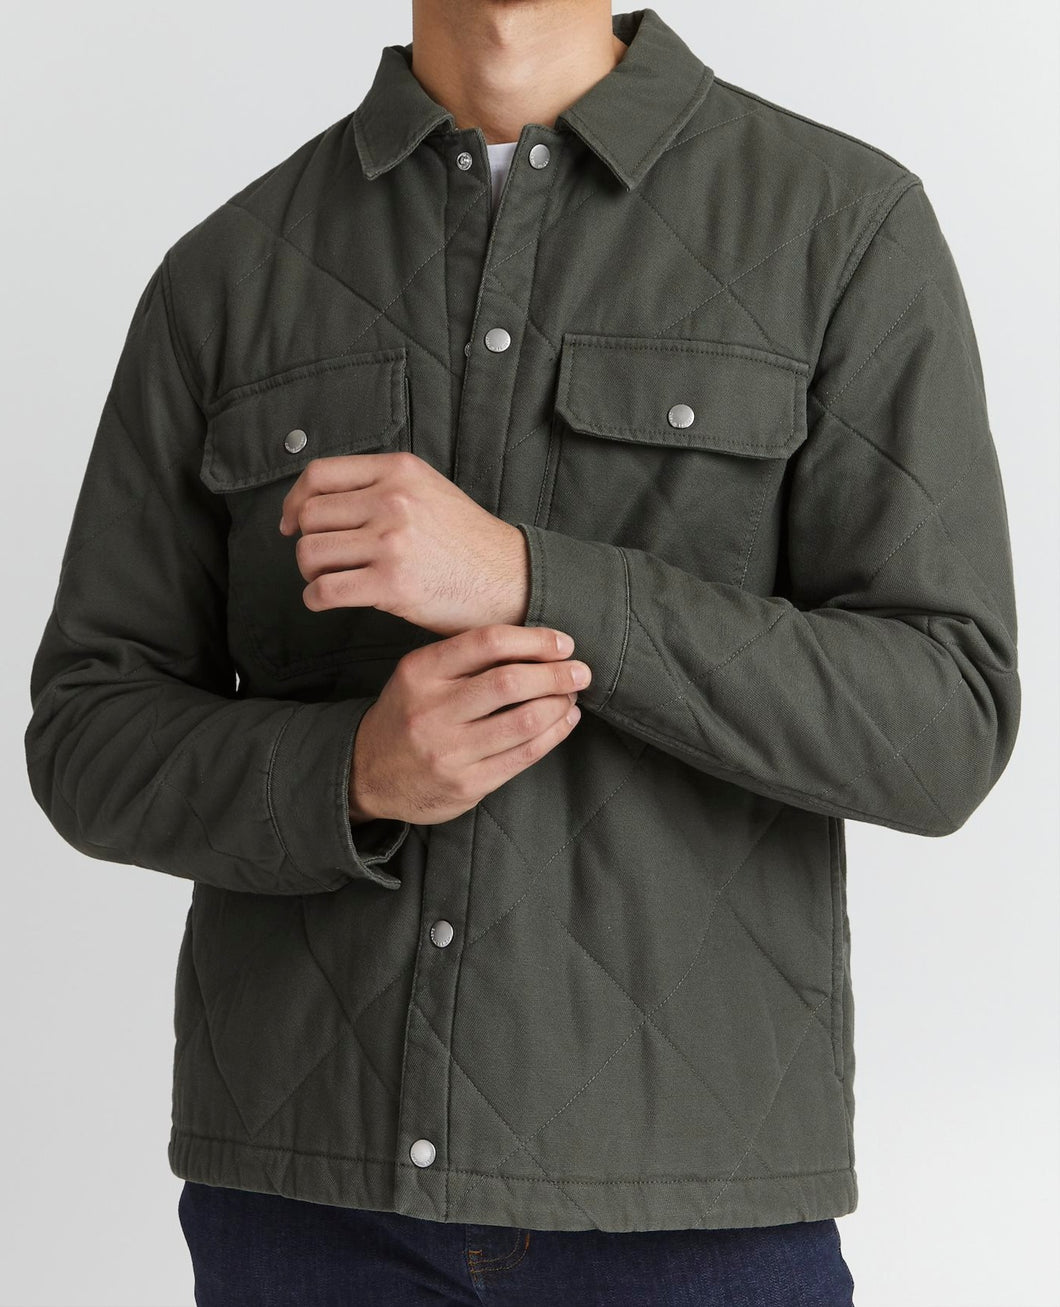 Beetle Green Quilted Jacket - Ortiz | Casual Friday